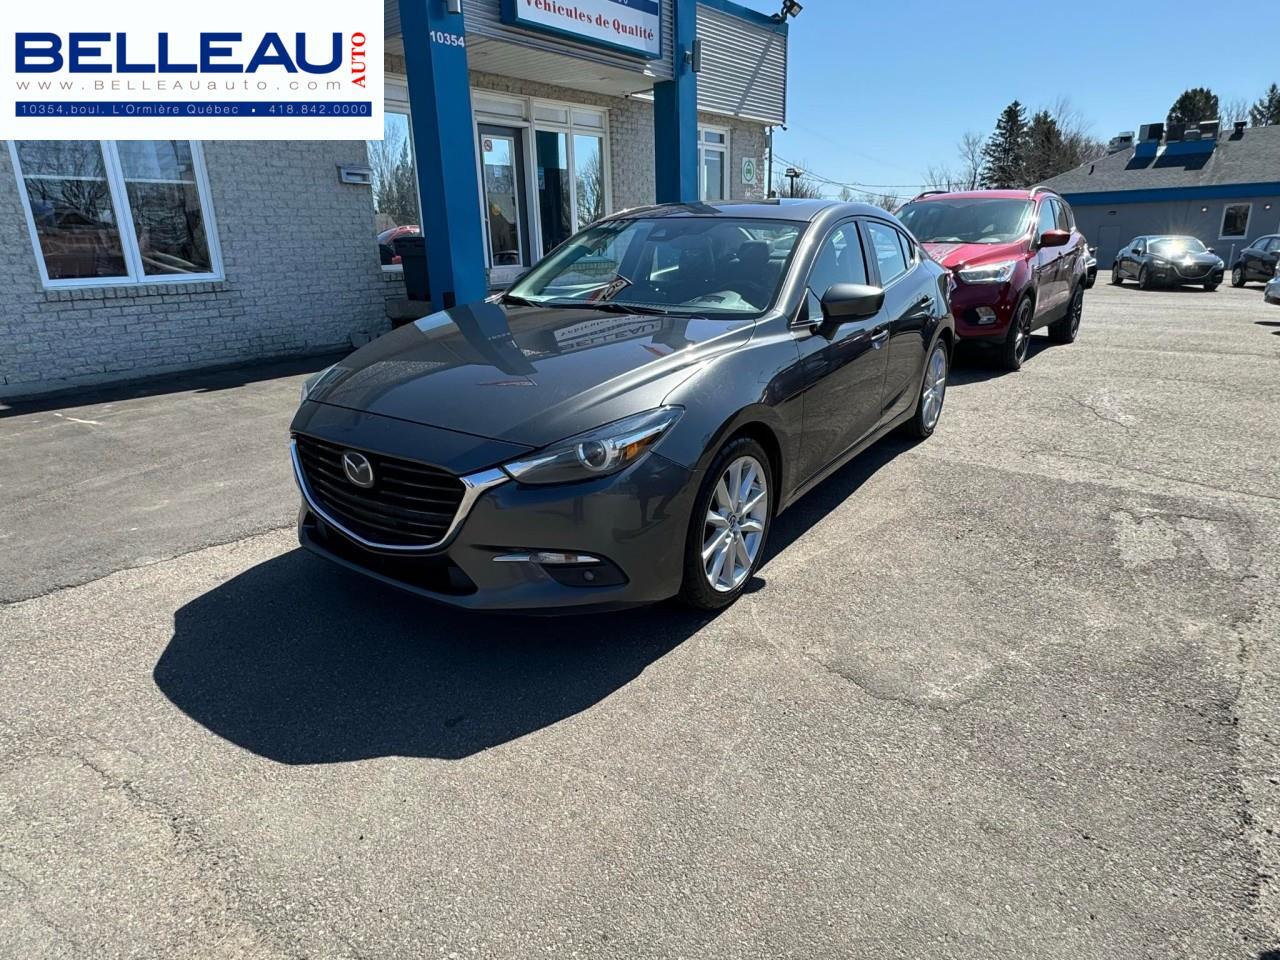 2017 Mazda Mazda3 GT**SEULEMENT 88,604KM**GPS-Int.Cuir-AUTOMATIQUE-T